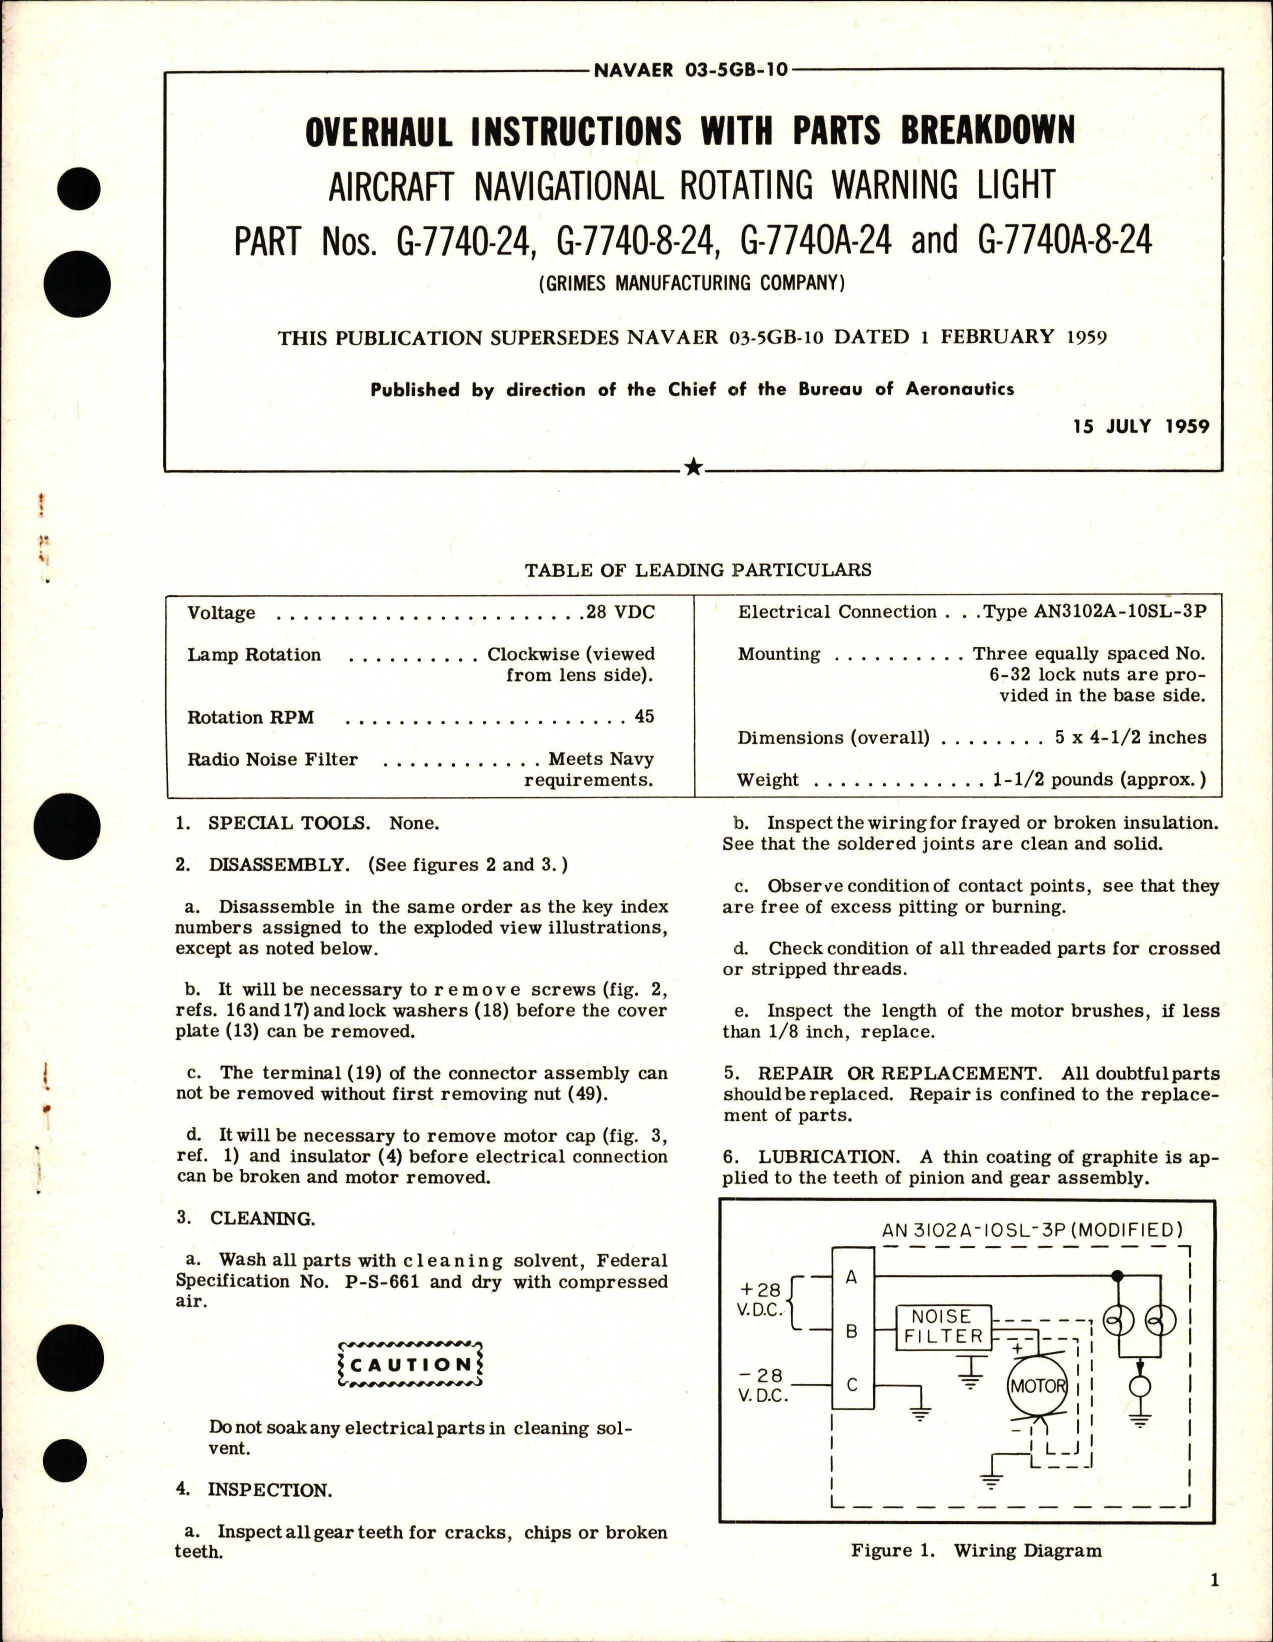 Sample page 1 from AirCorps Library document: Overhaul Instructions with Parts Breakdown for Navigational Rotating Warning Light 